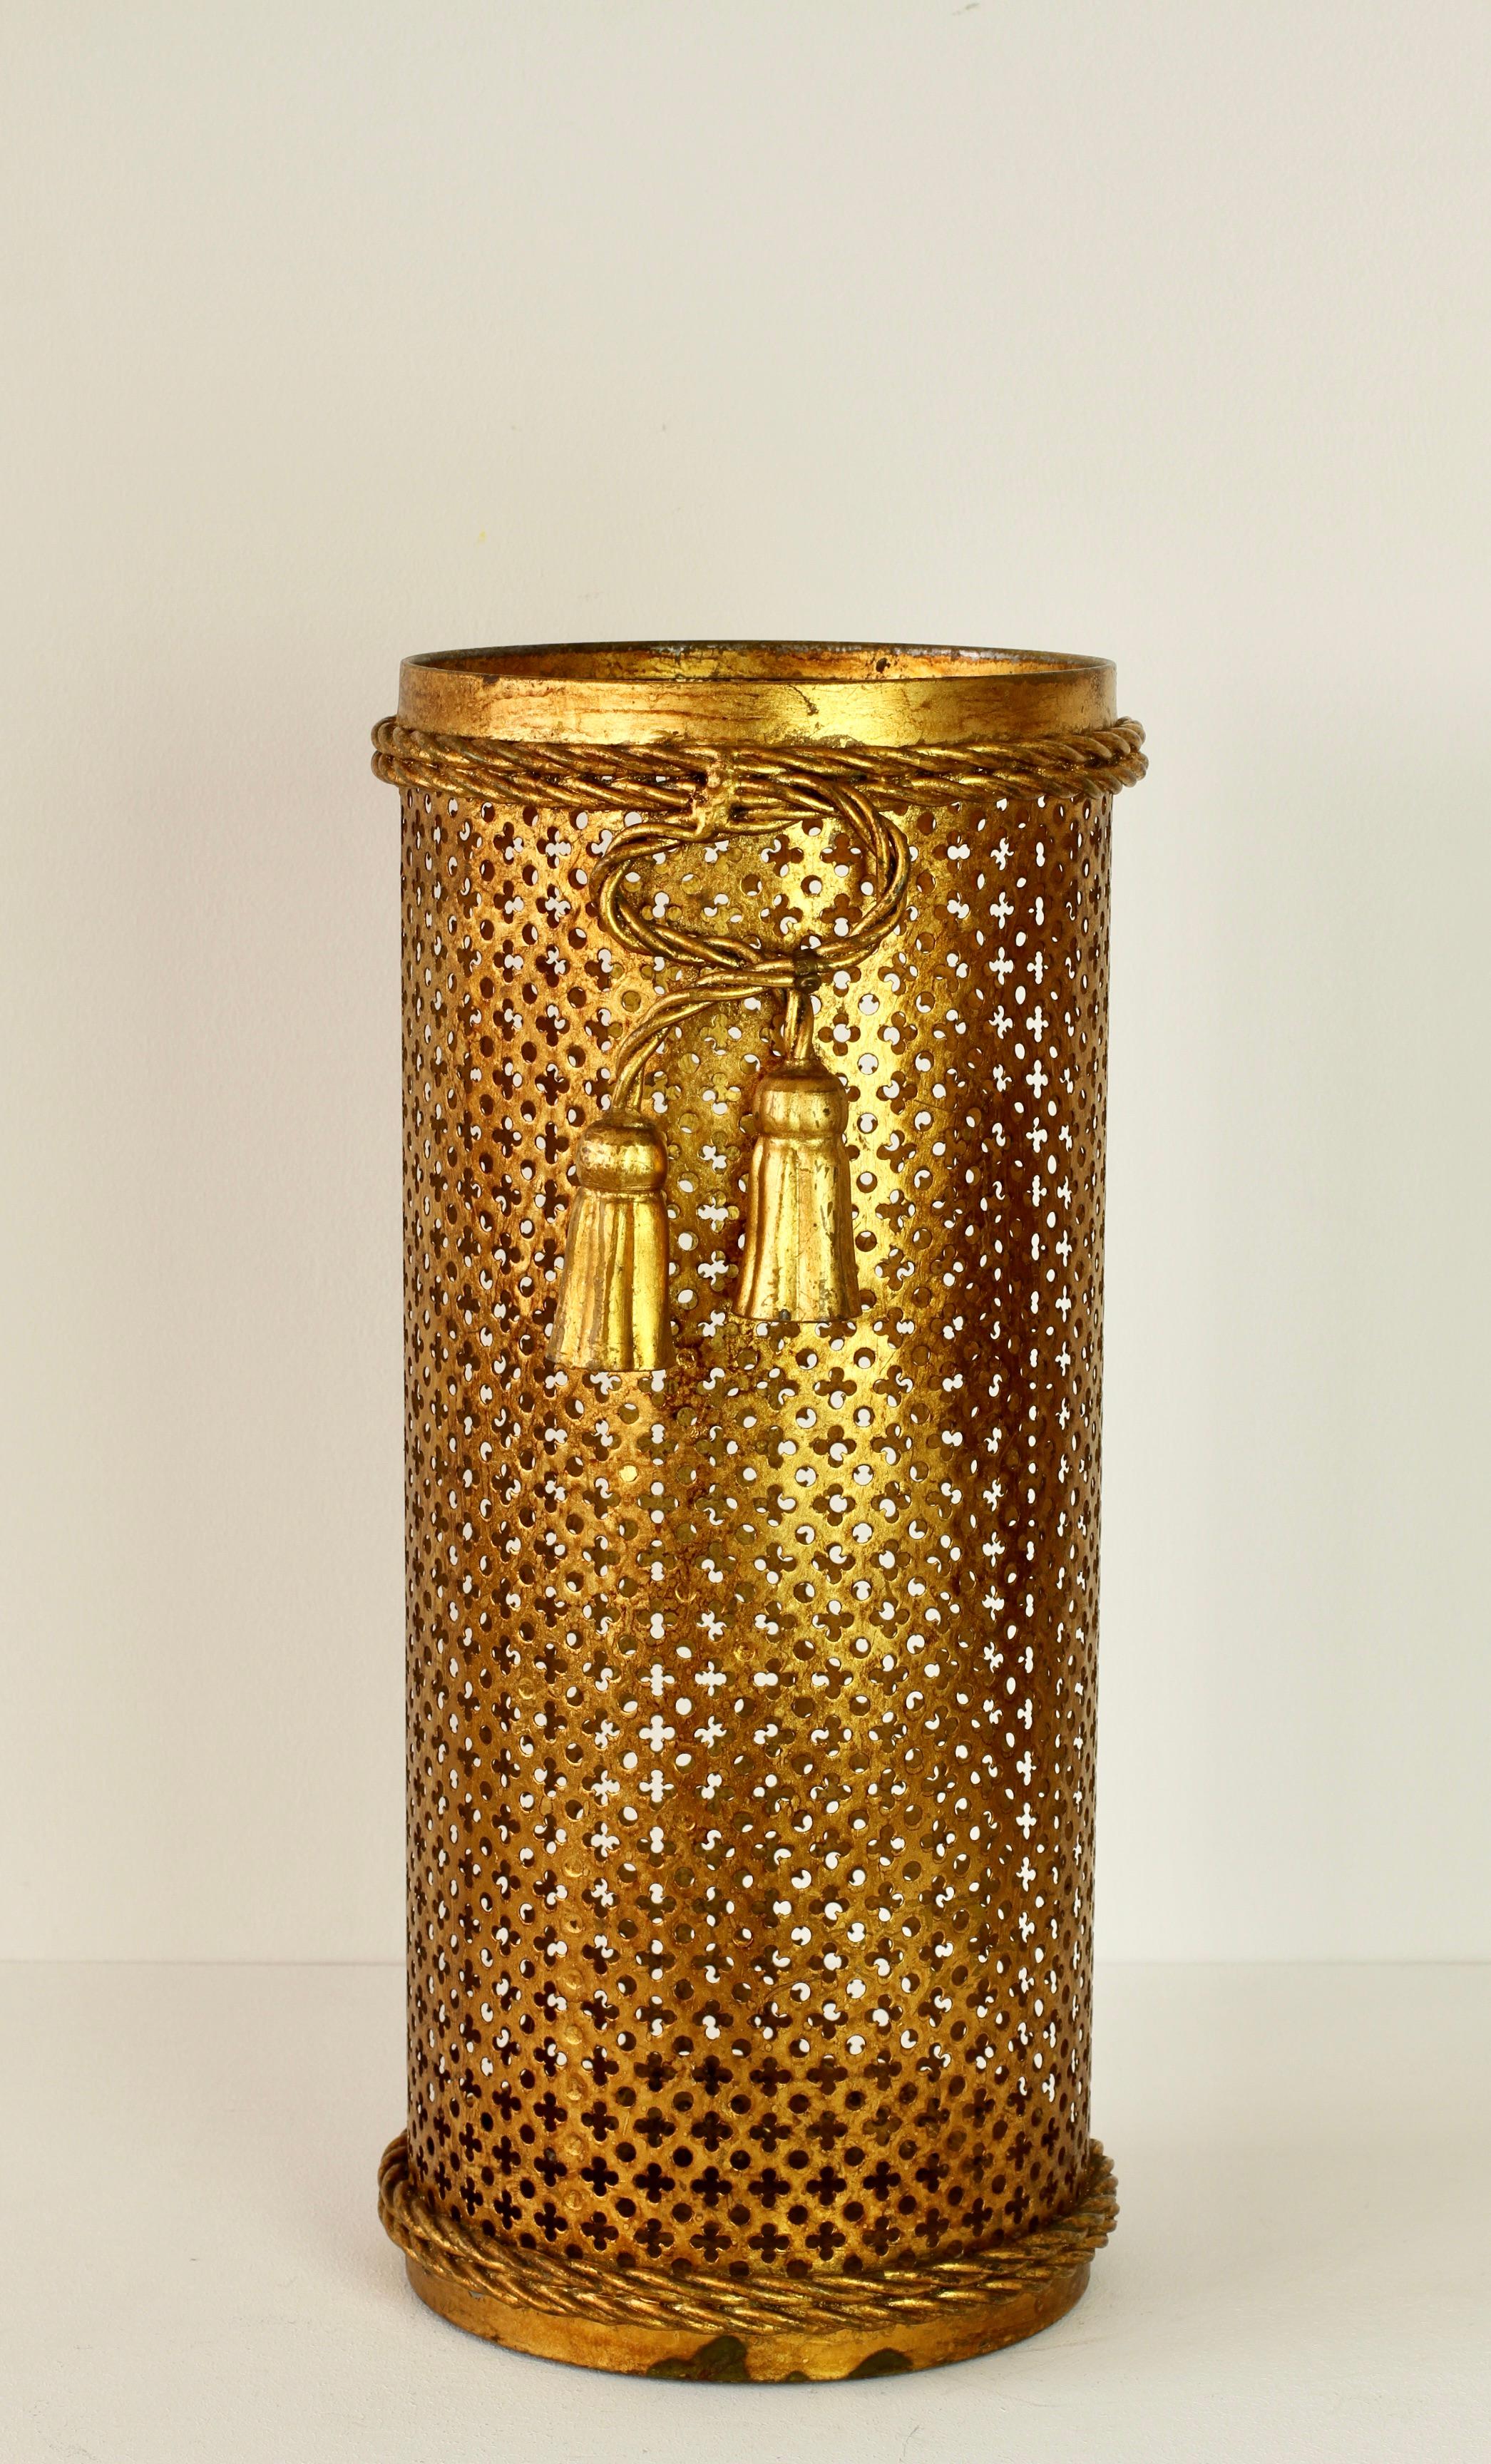 Midcentury Italian Hollywood Regency Gold Gilded Umbrella Stand or Holder, 1950s For Sale 6